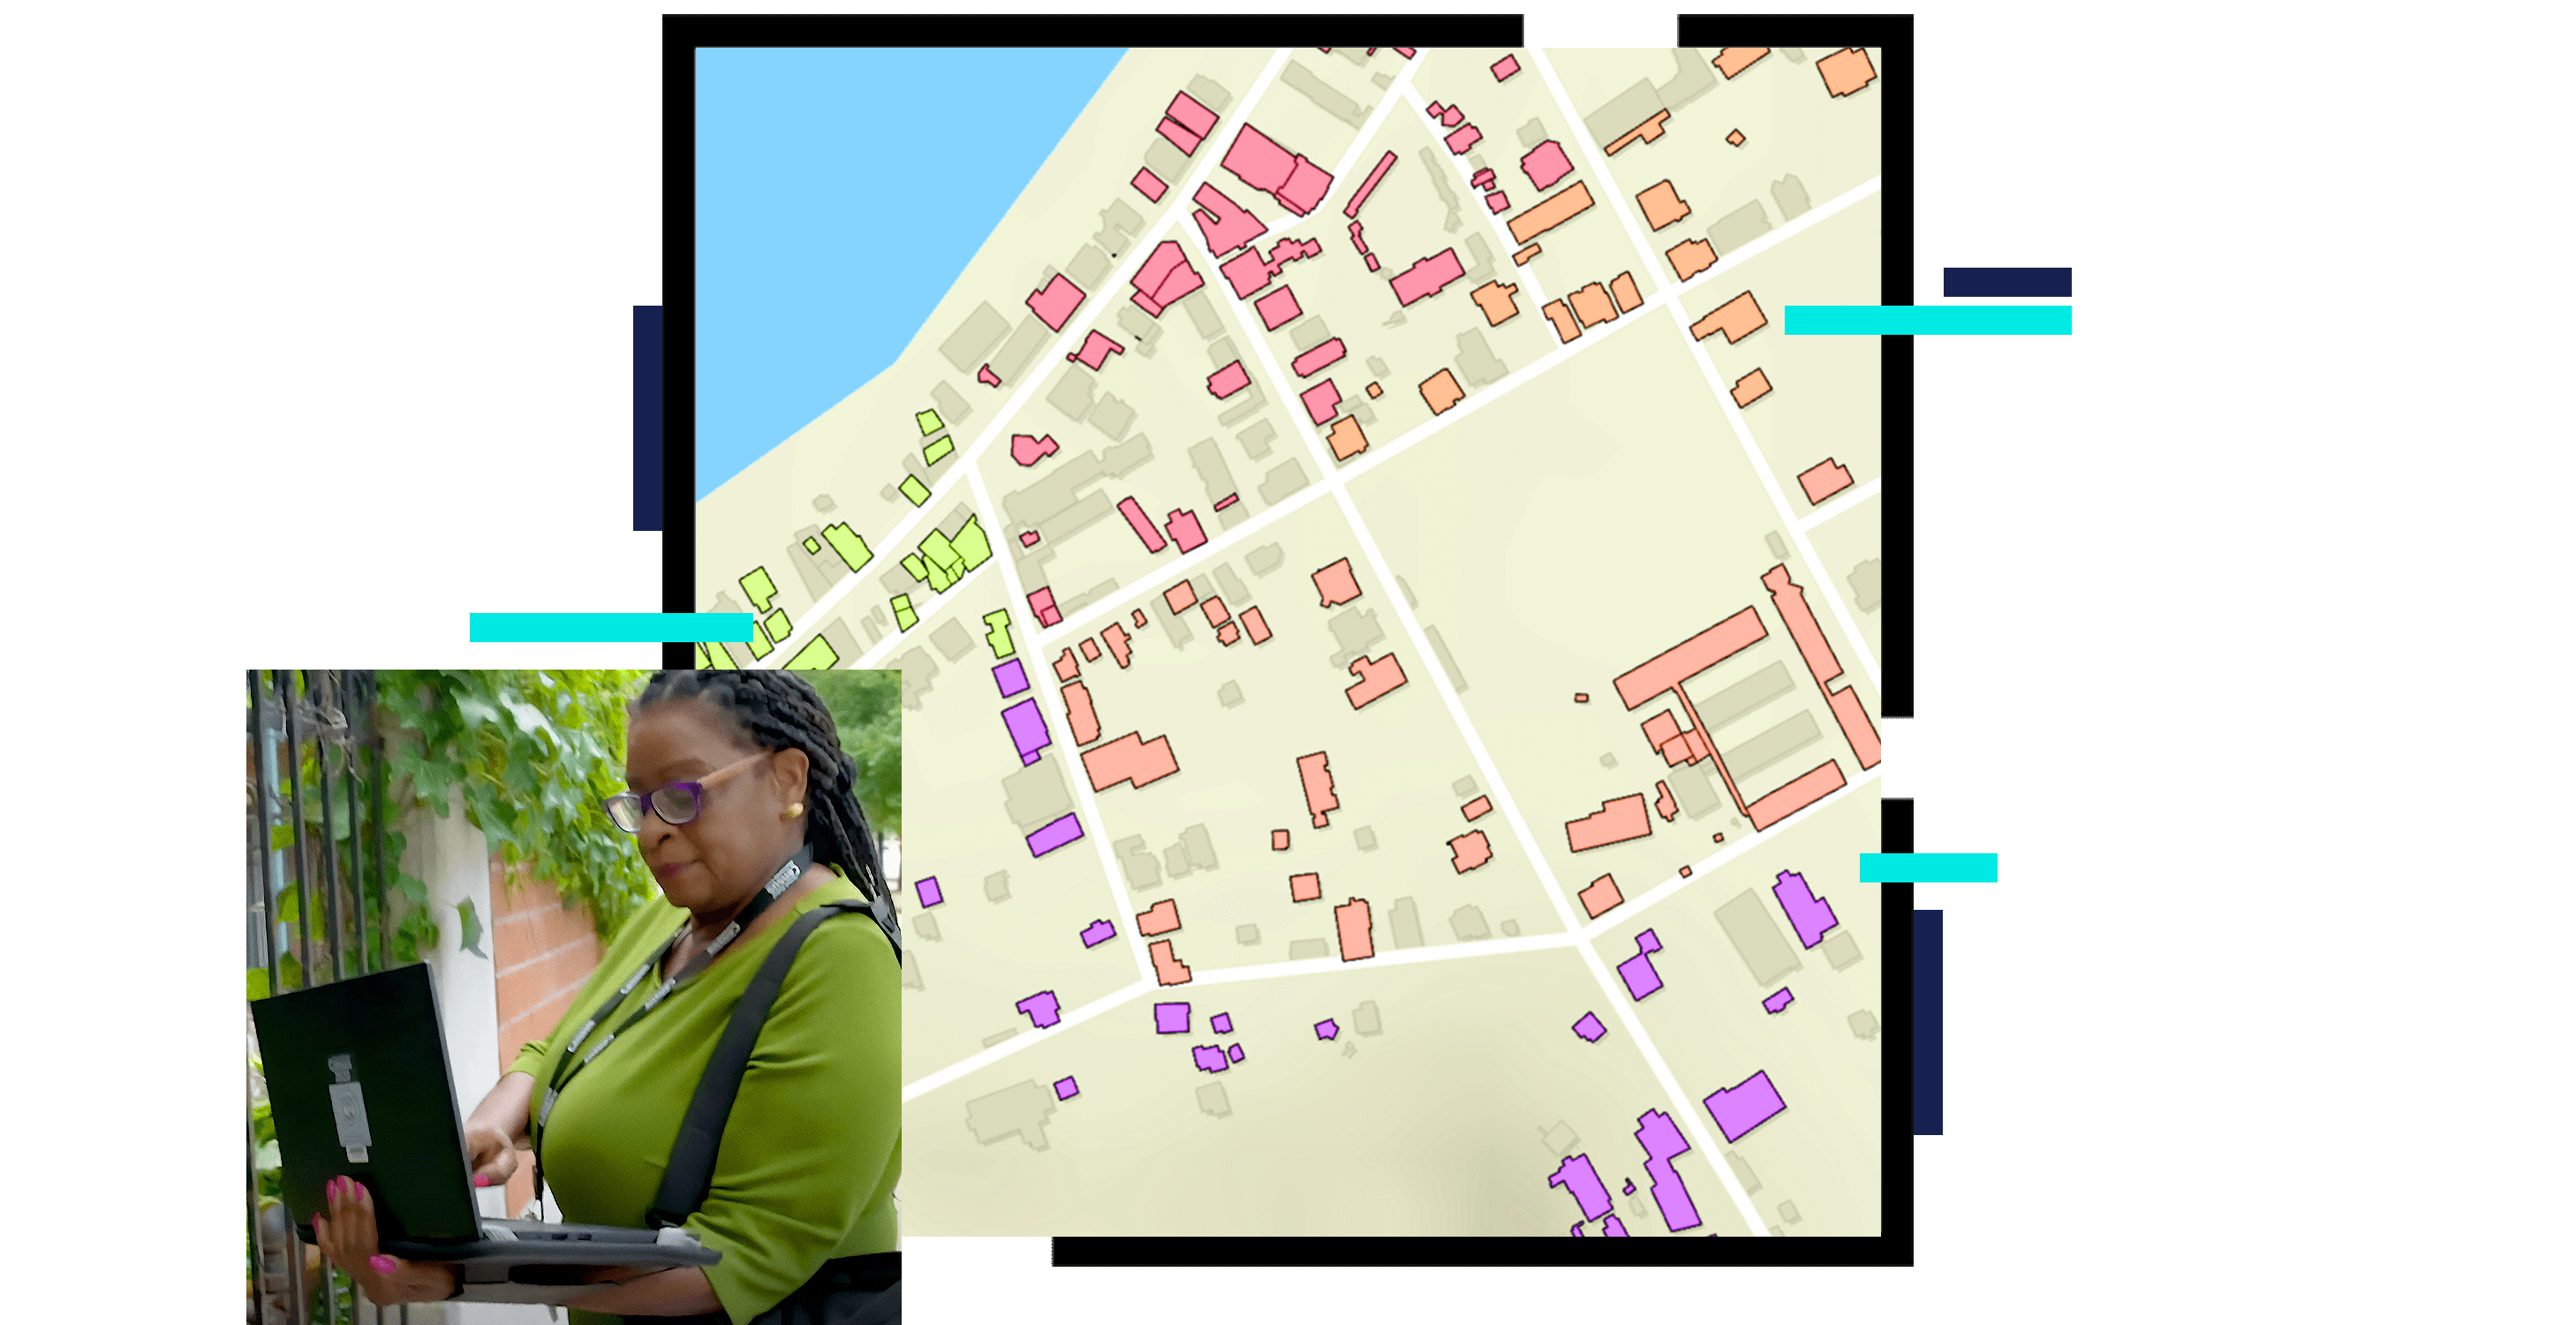 A map of a coastal city with buildings shaded in different colors, overlaid with a photo of a person using a laptop as they stand on a city sidewalk